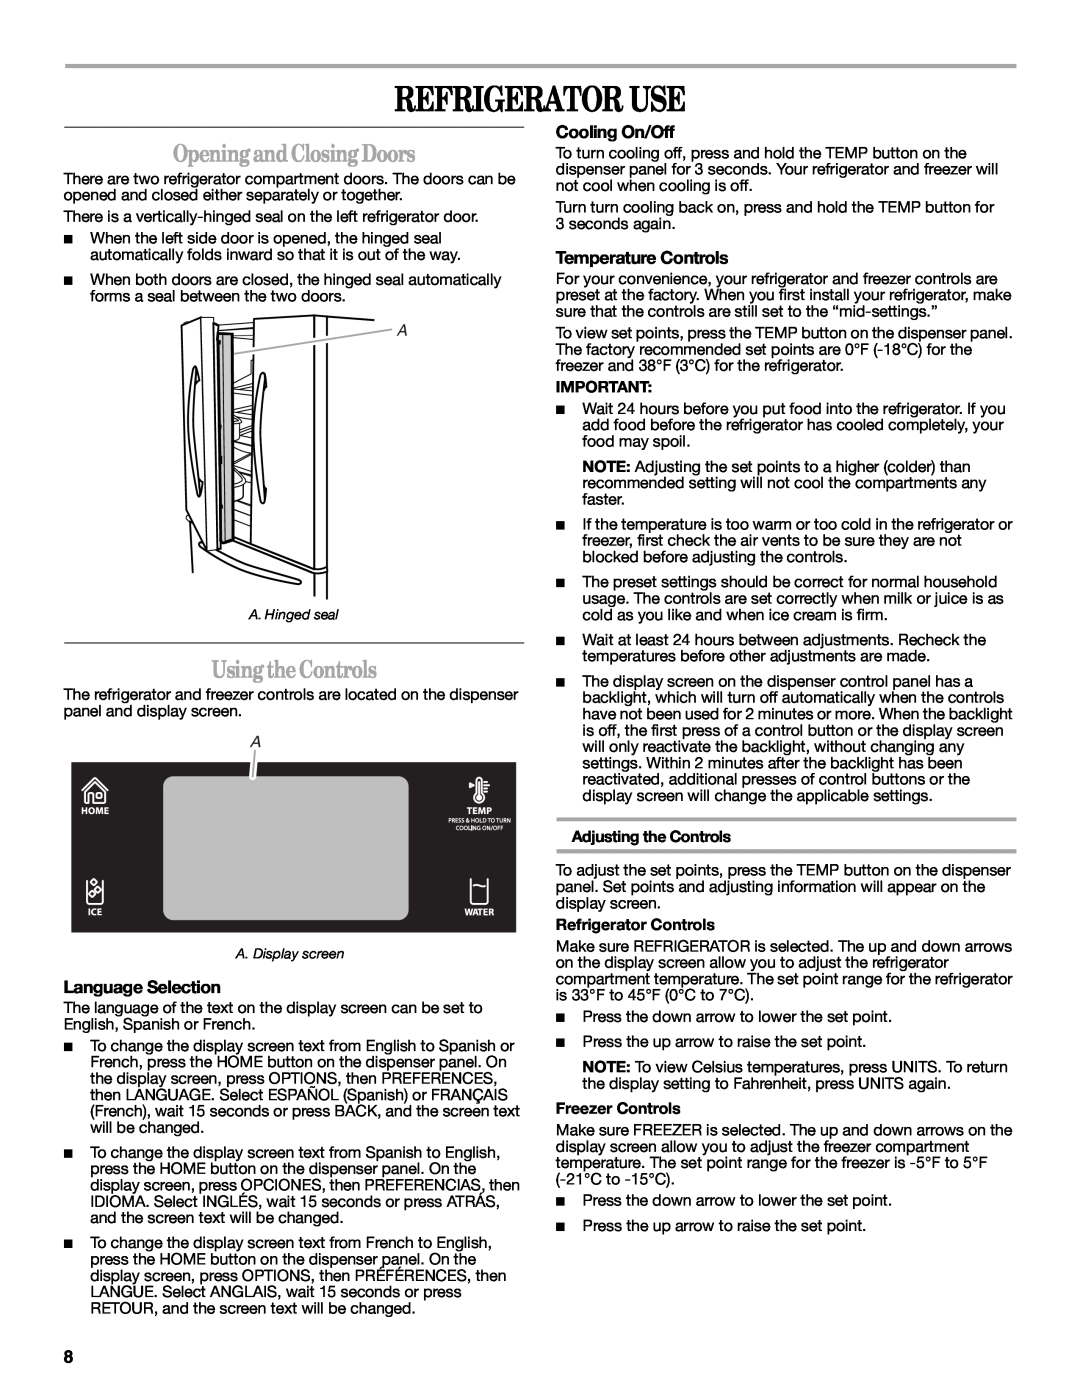 Whirlpool W10226405A, W10245525A Refrigerator Use, Opening and Closing Doors, Using the Controls, Adjusting the Controls 